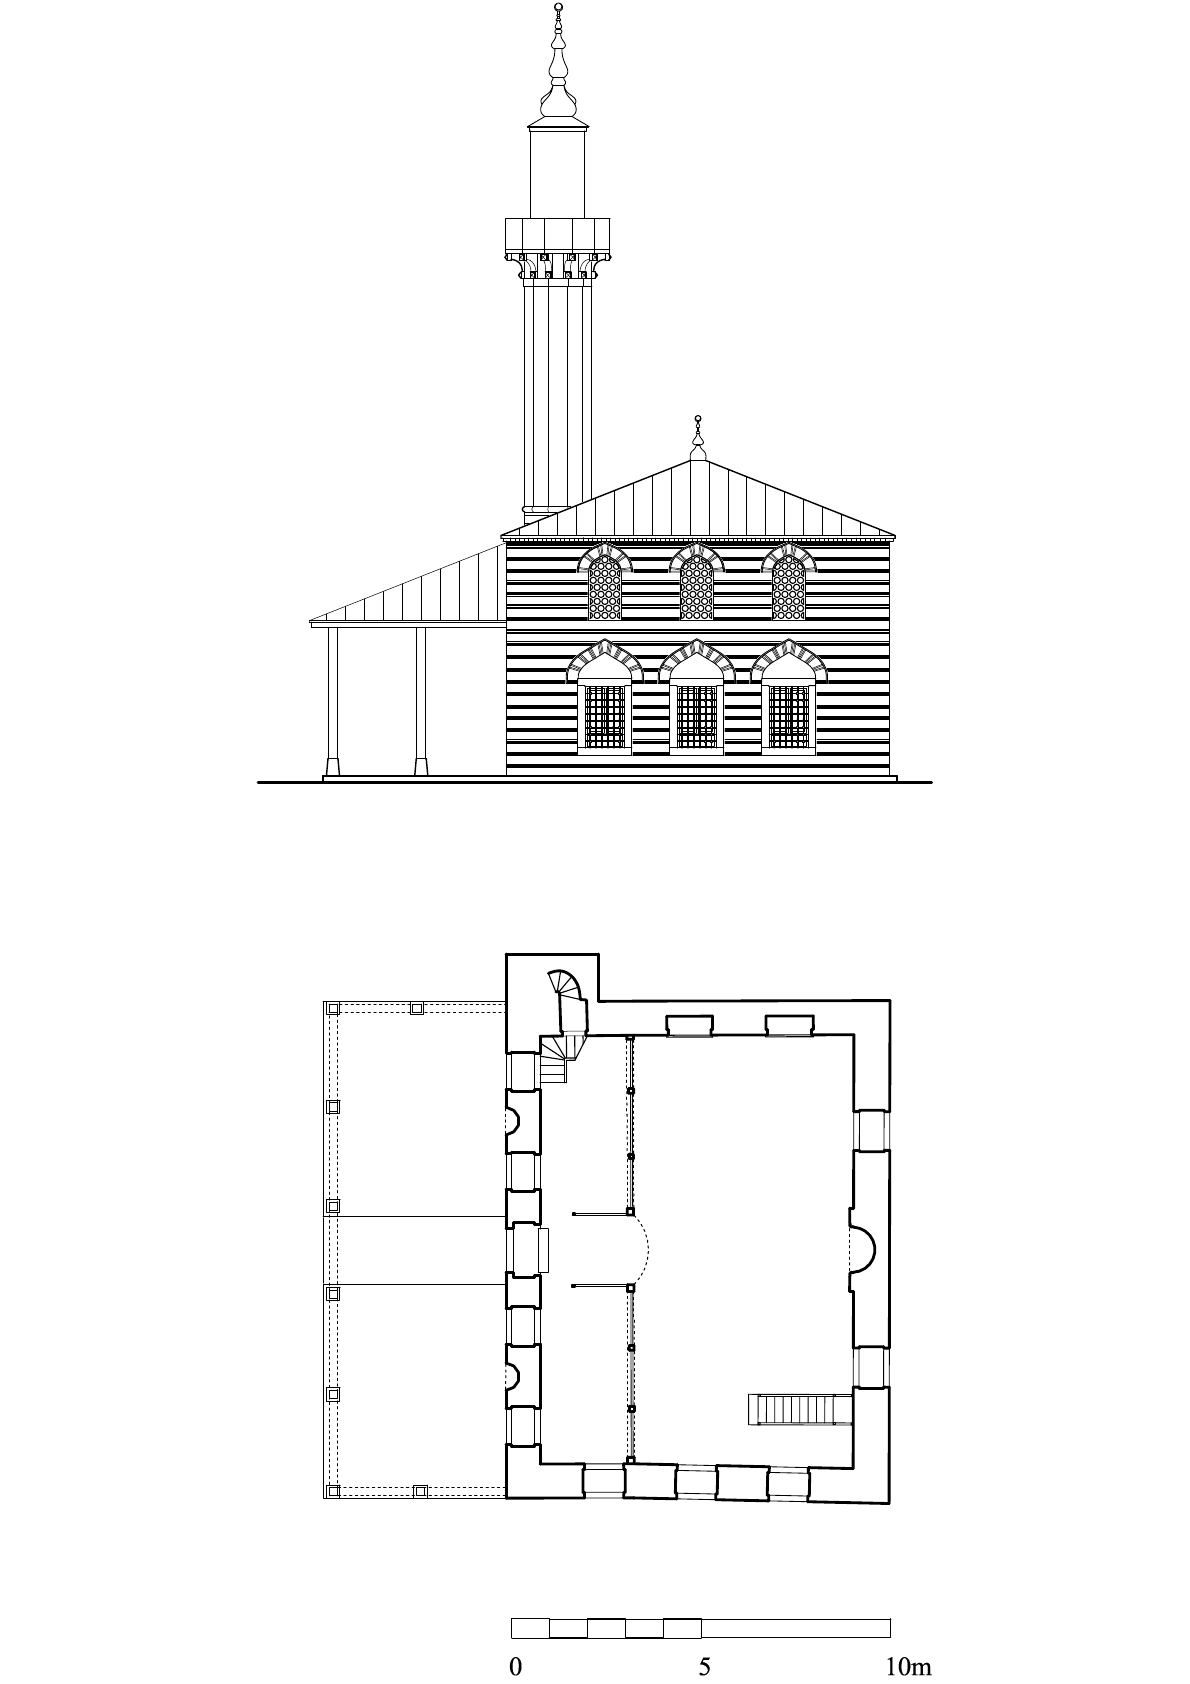 Çavuşbaşı Mahmut Ağa Camii - Floor plan and elevation of mosque with hypothetical reconstruction of portico. DWG file in AutoCAD 2000 format. Click the download button to download a zipped file containing the .dwg file.